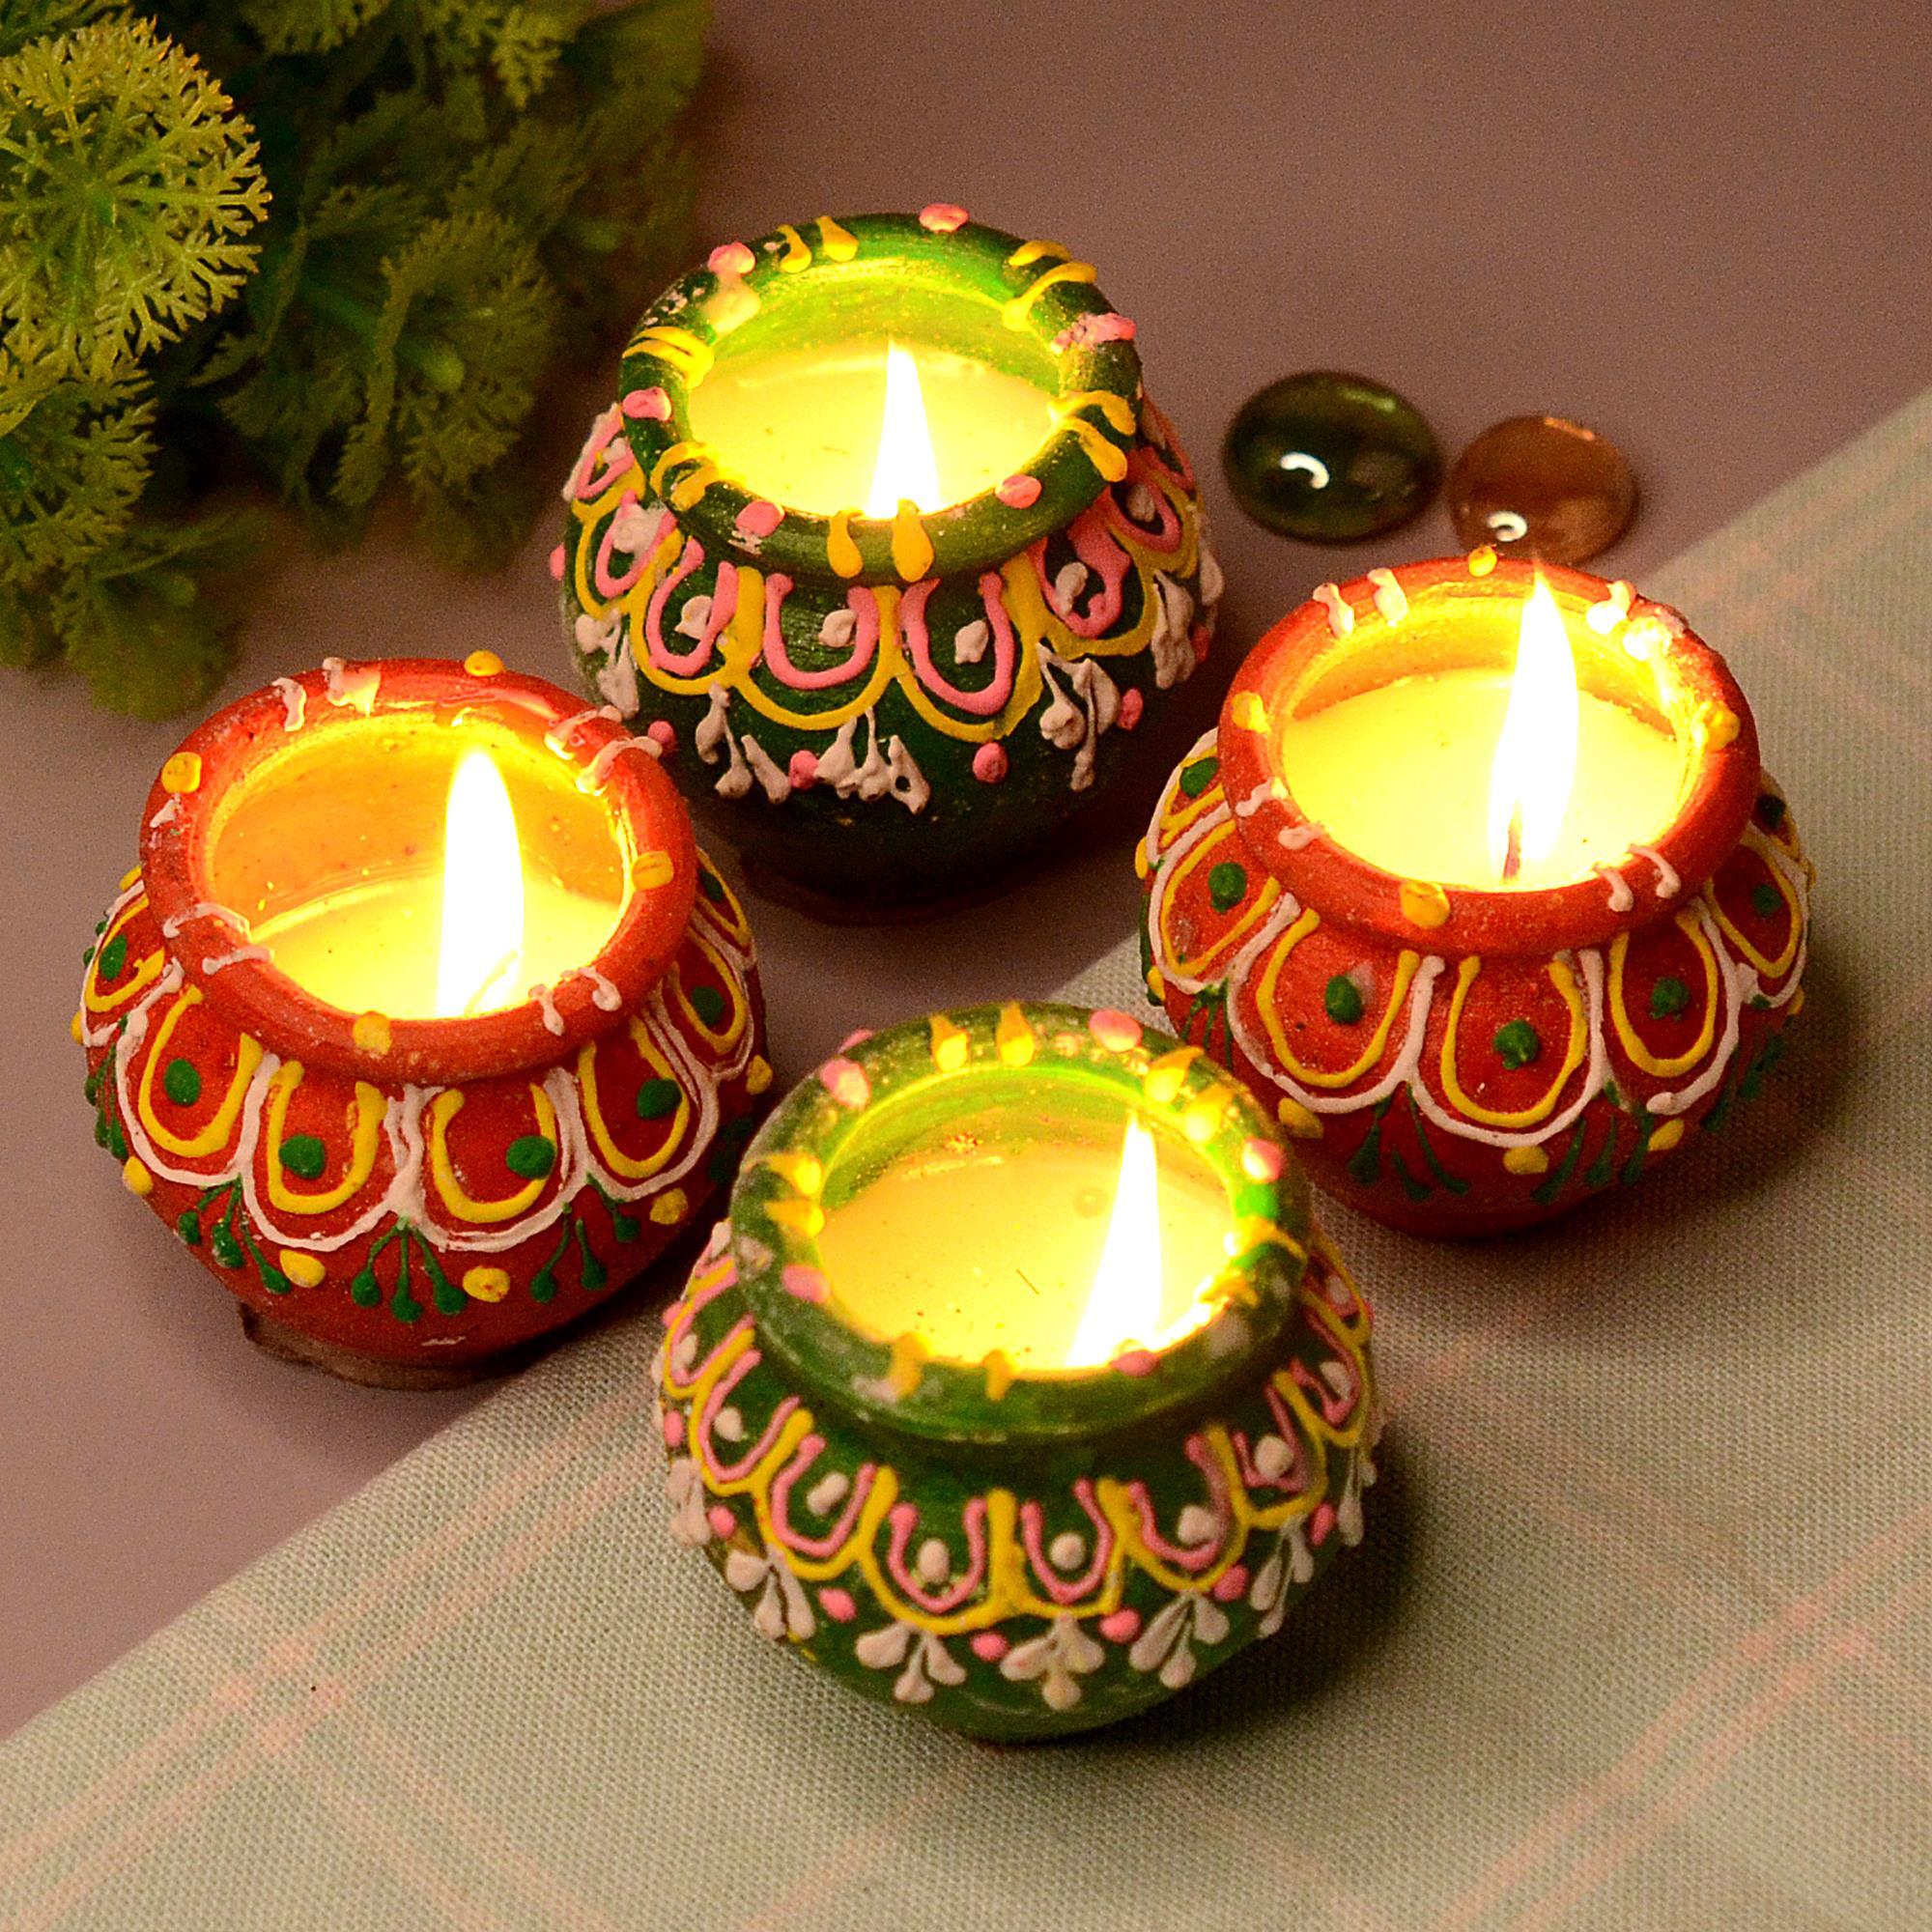 Buy DEVU PARBAT ENTERPRISE Metal Tea Candle Holder and Diwali Decoration  Items Traditional Designer Diya for Decor (Multicolour) -Set of 6 Online at  Low Prices in India - Amazon.in